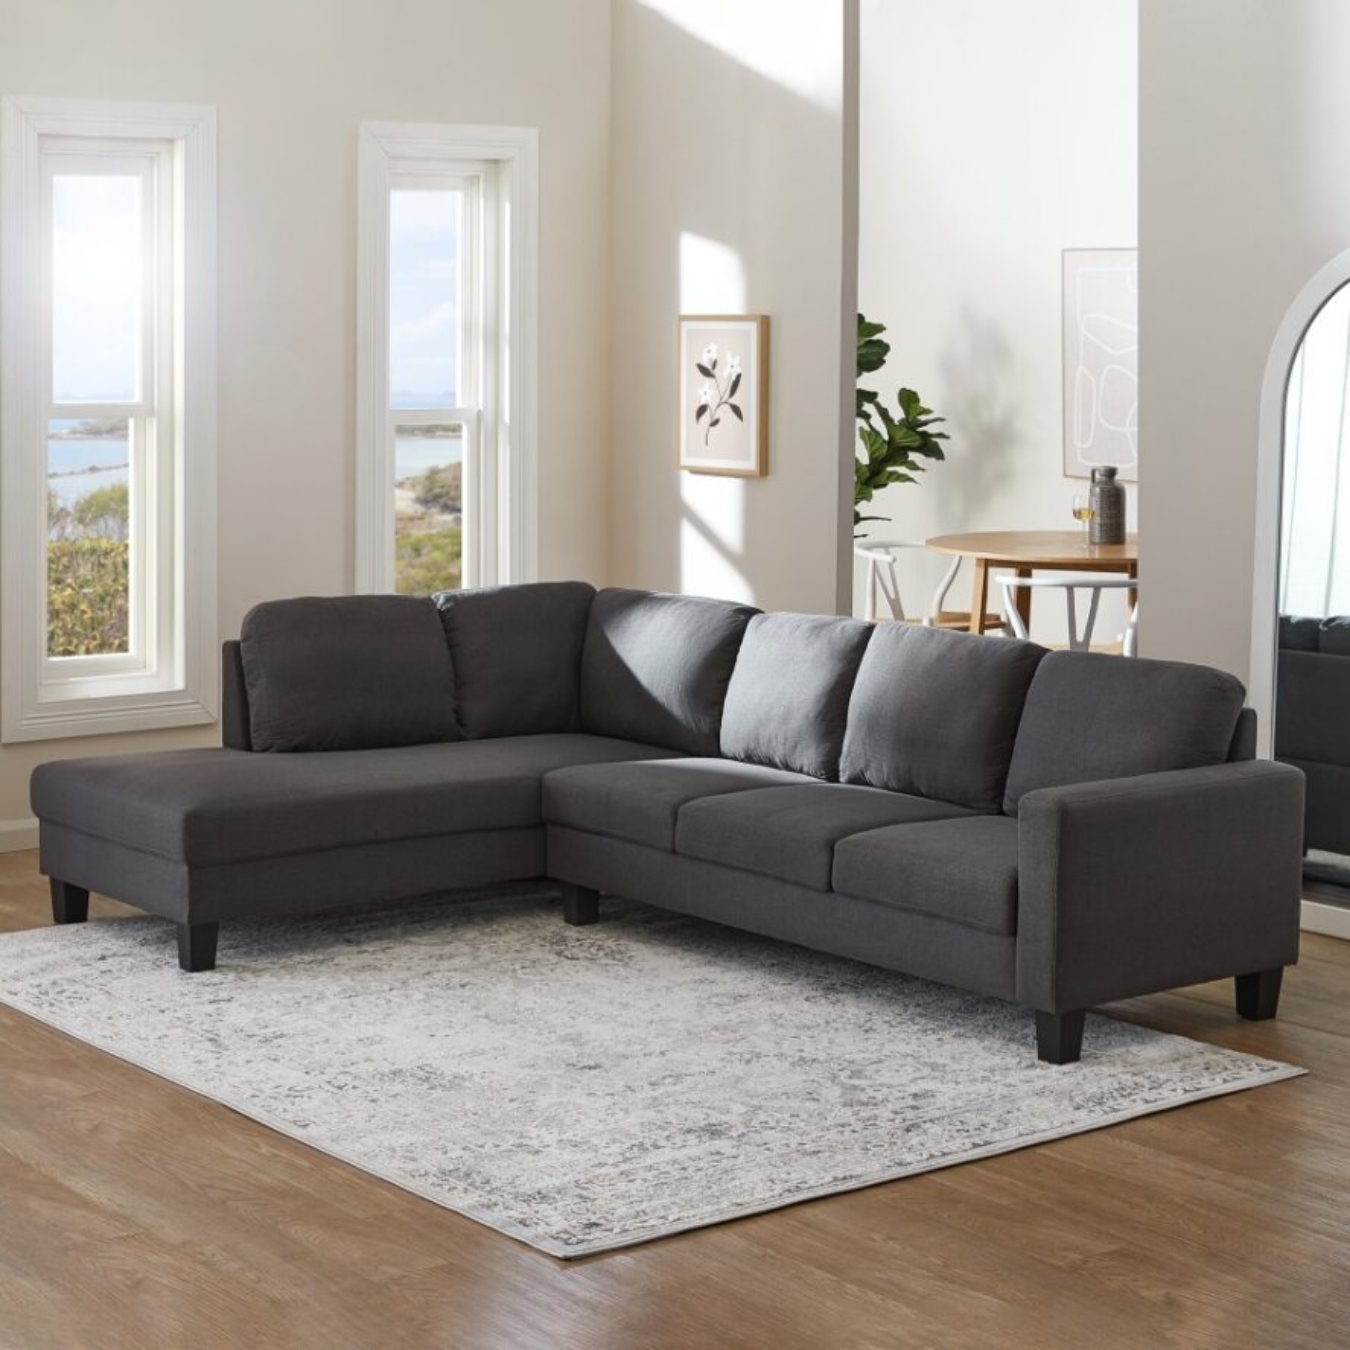 For a living room with stylish, comfortable, and spacious seating, the Evelyn 5 Seater Sofa (L-Shape, Chaise on left) will meet your needs. 